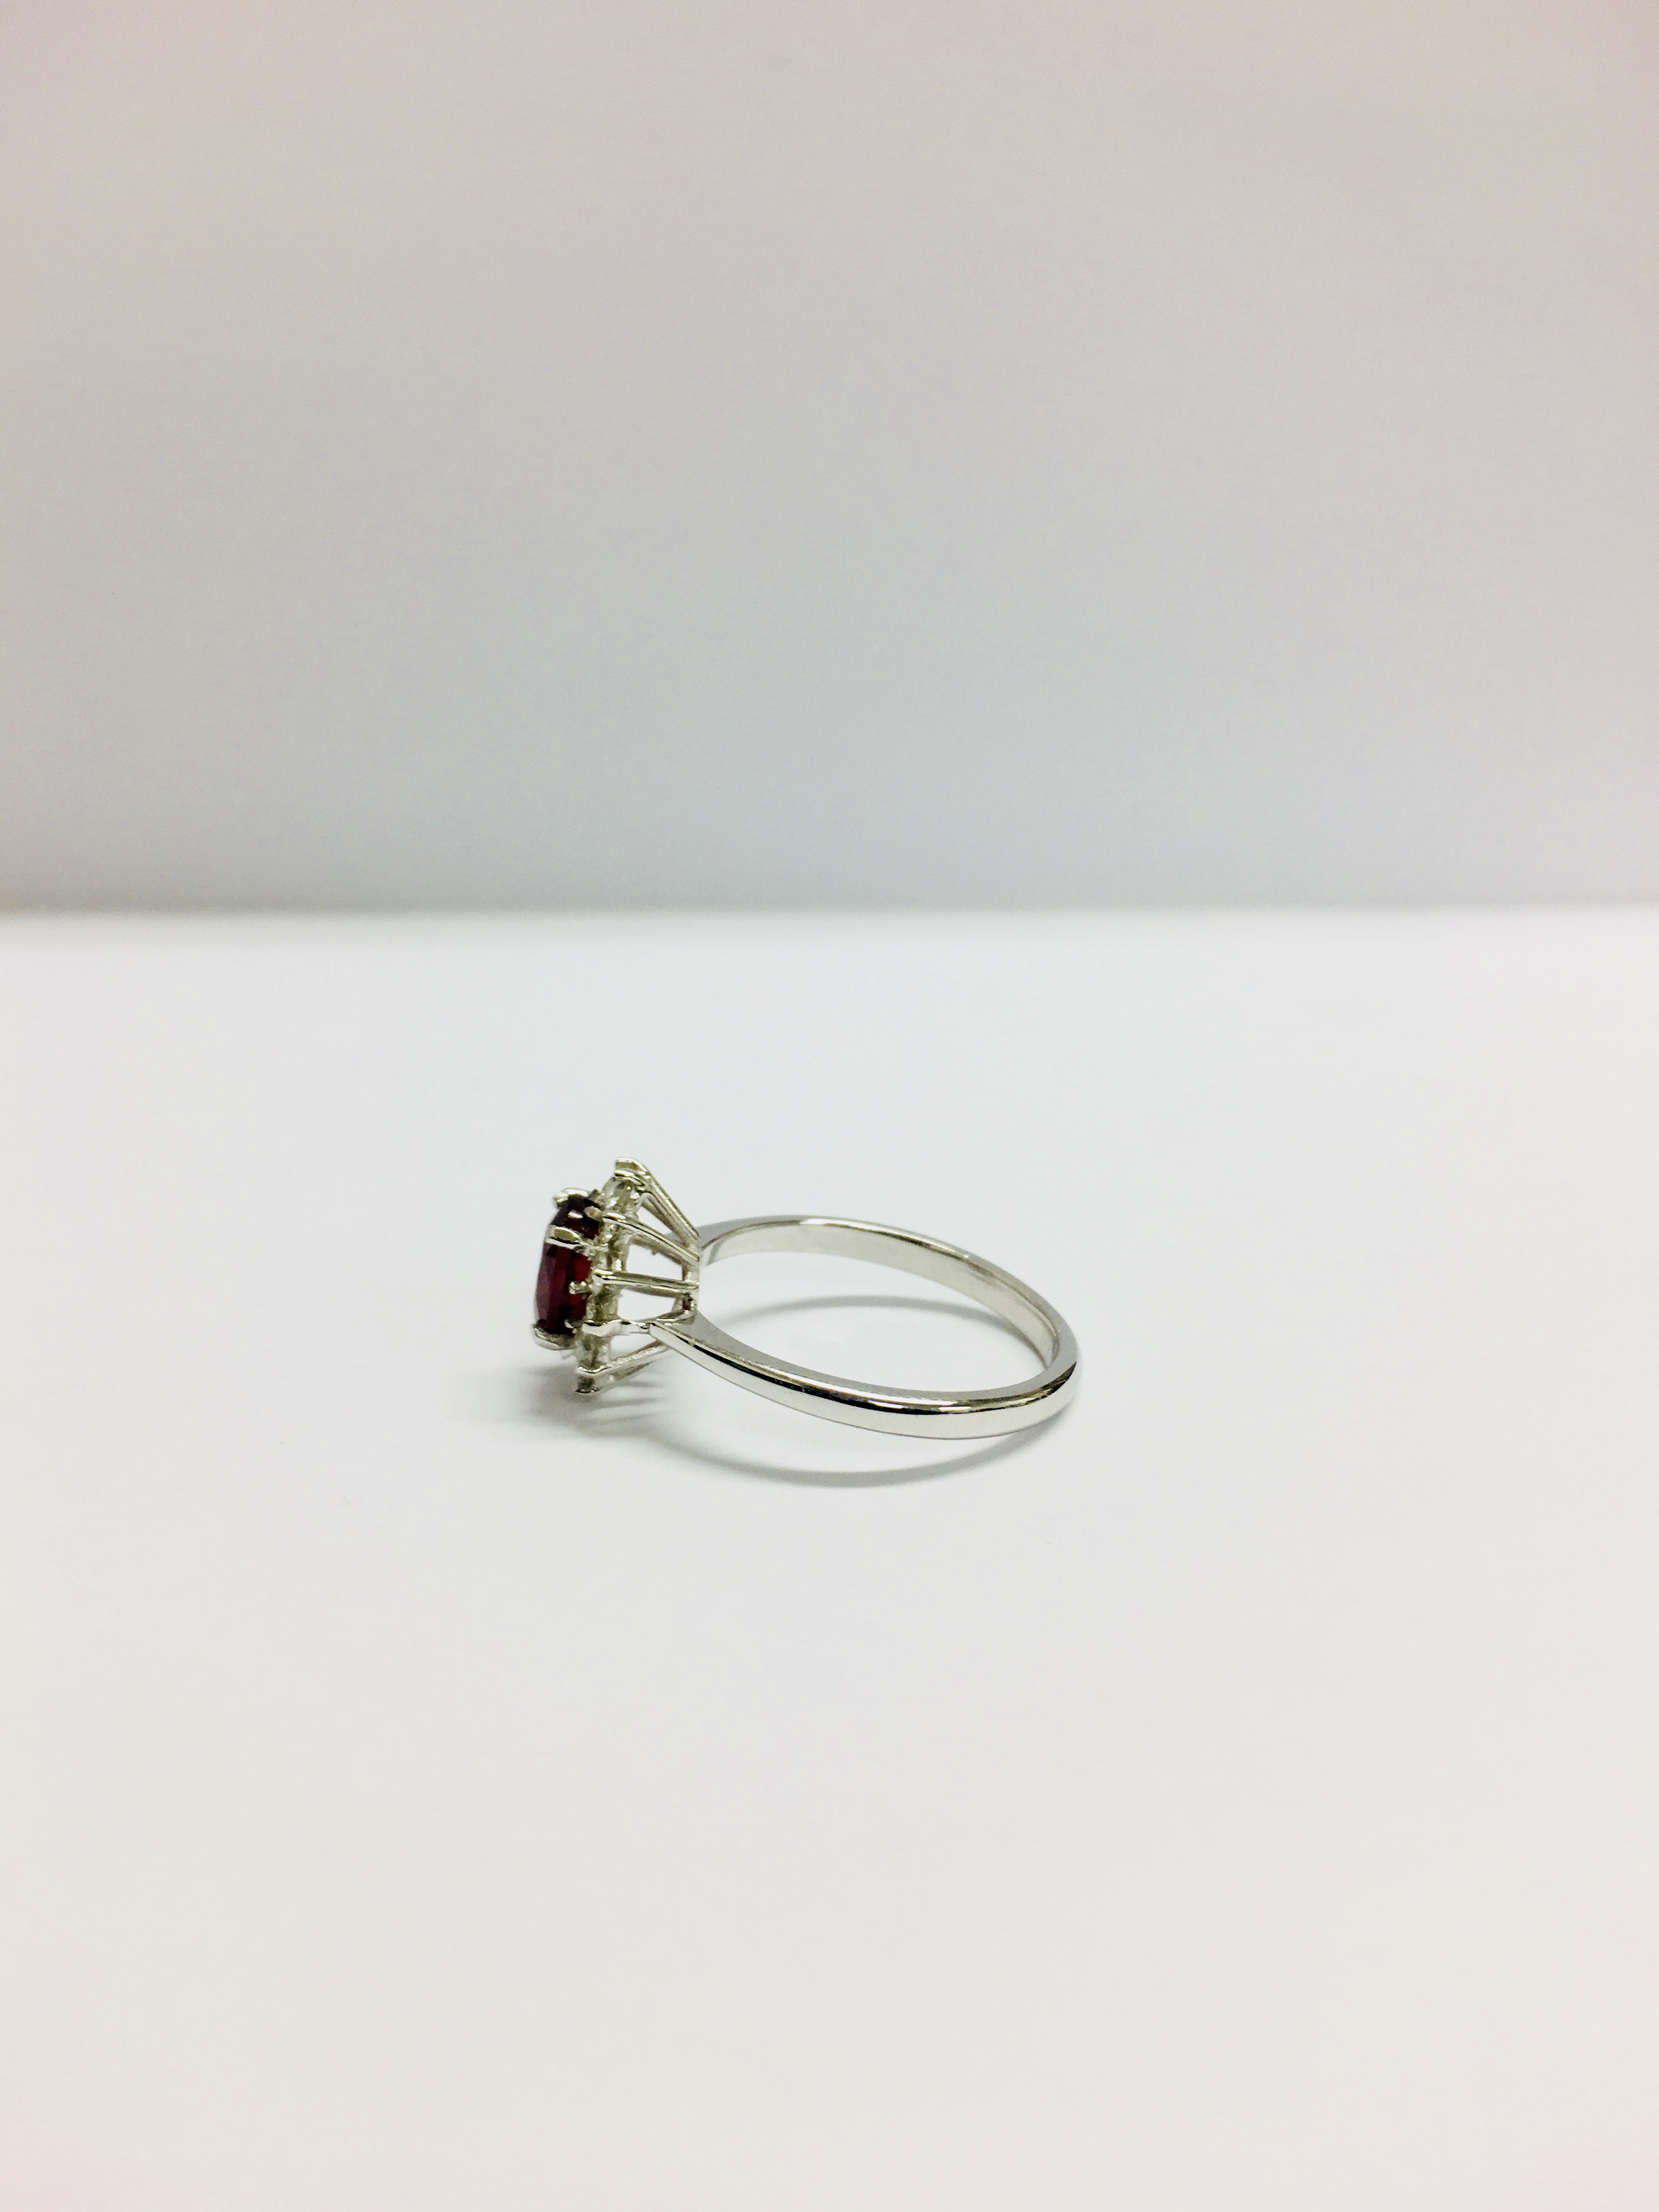 0.80Ct Ruby And Diamond Cluster Ring Set With A Oval Cut(Glass Filled) Ruby - Image 3 of 9